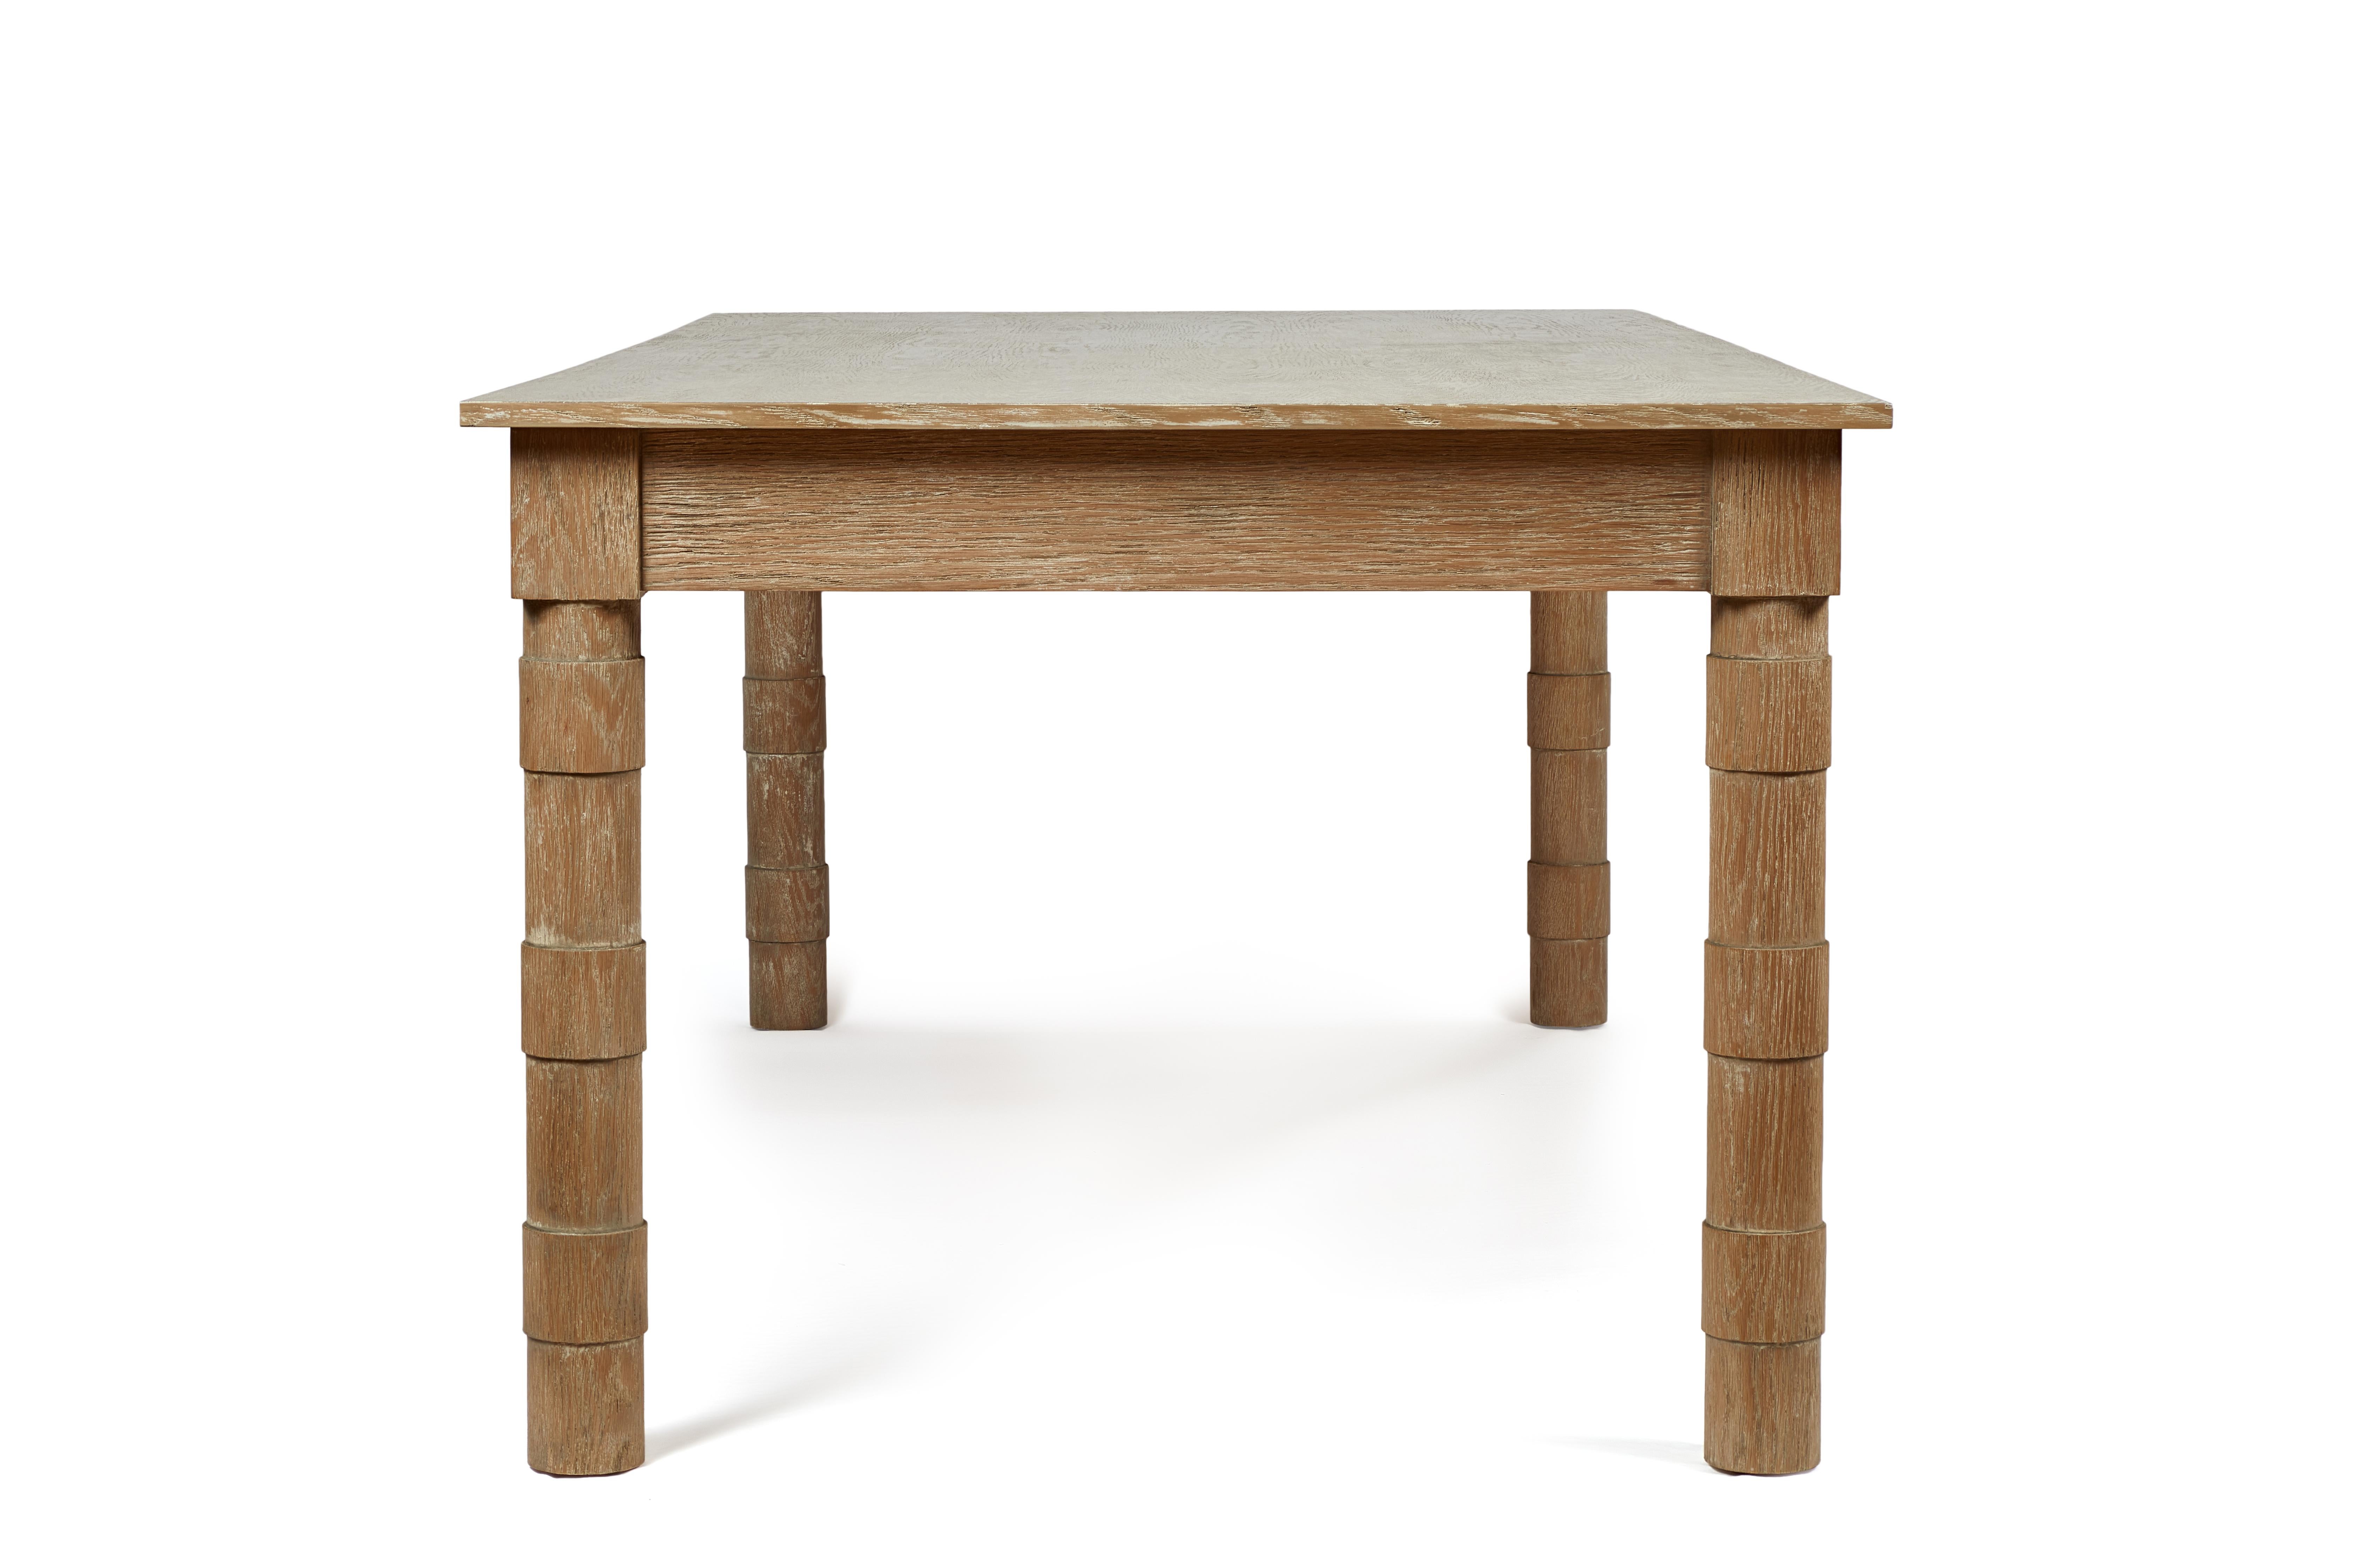 Modern Transitional Turned Leg Jenks Dining Table in Tanned Oak by Martin and Brockett For Sale